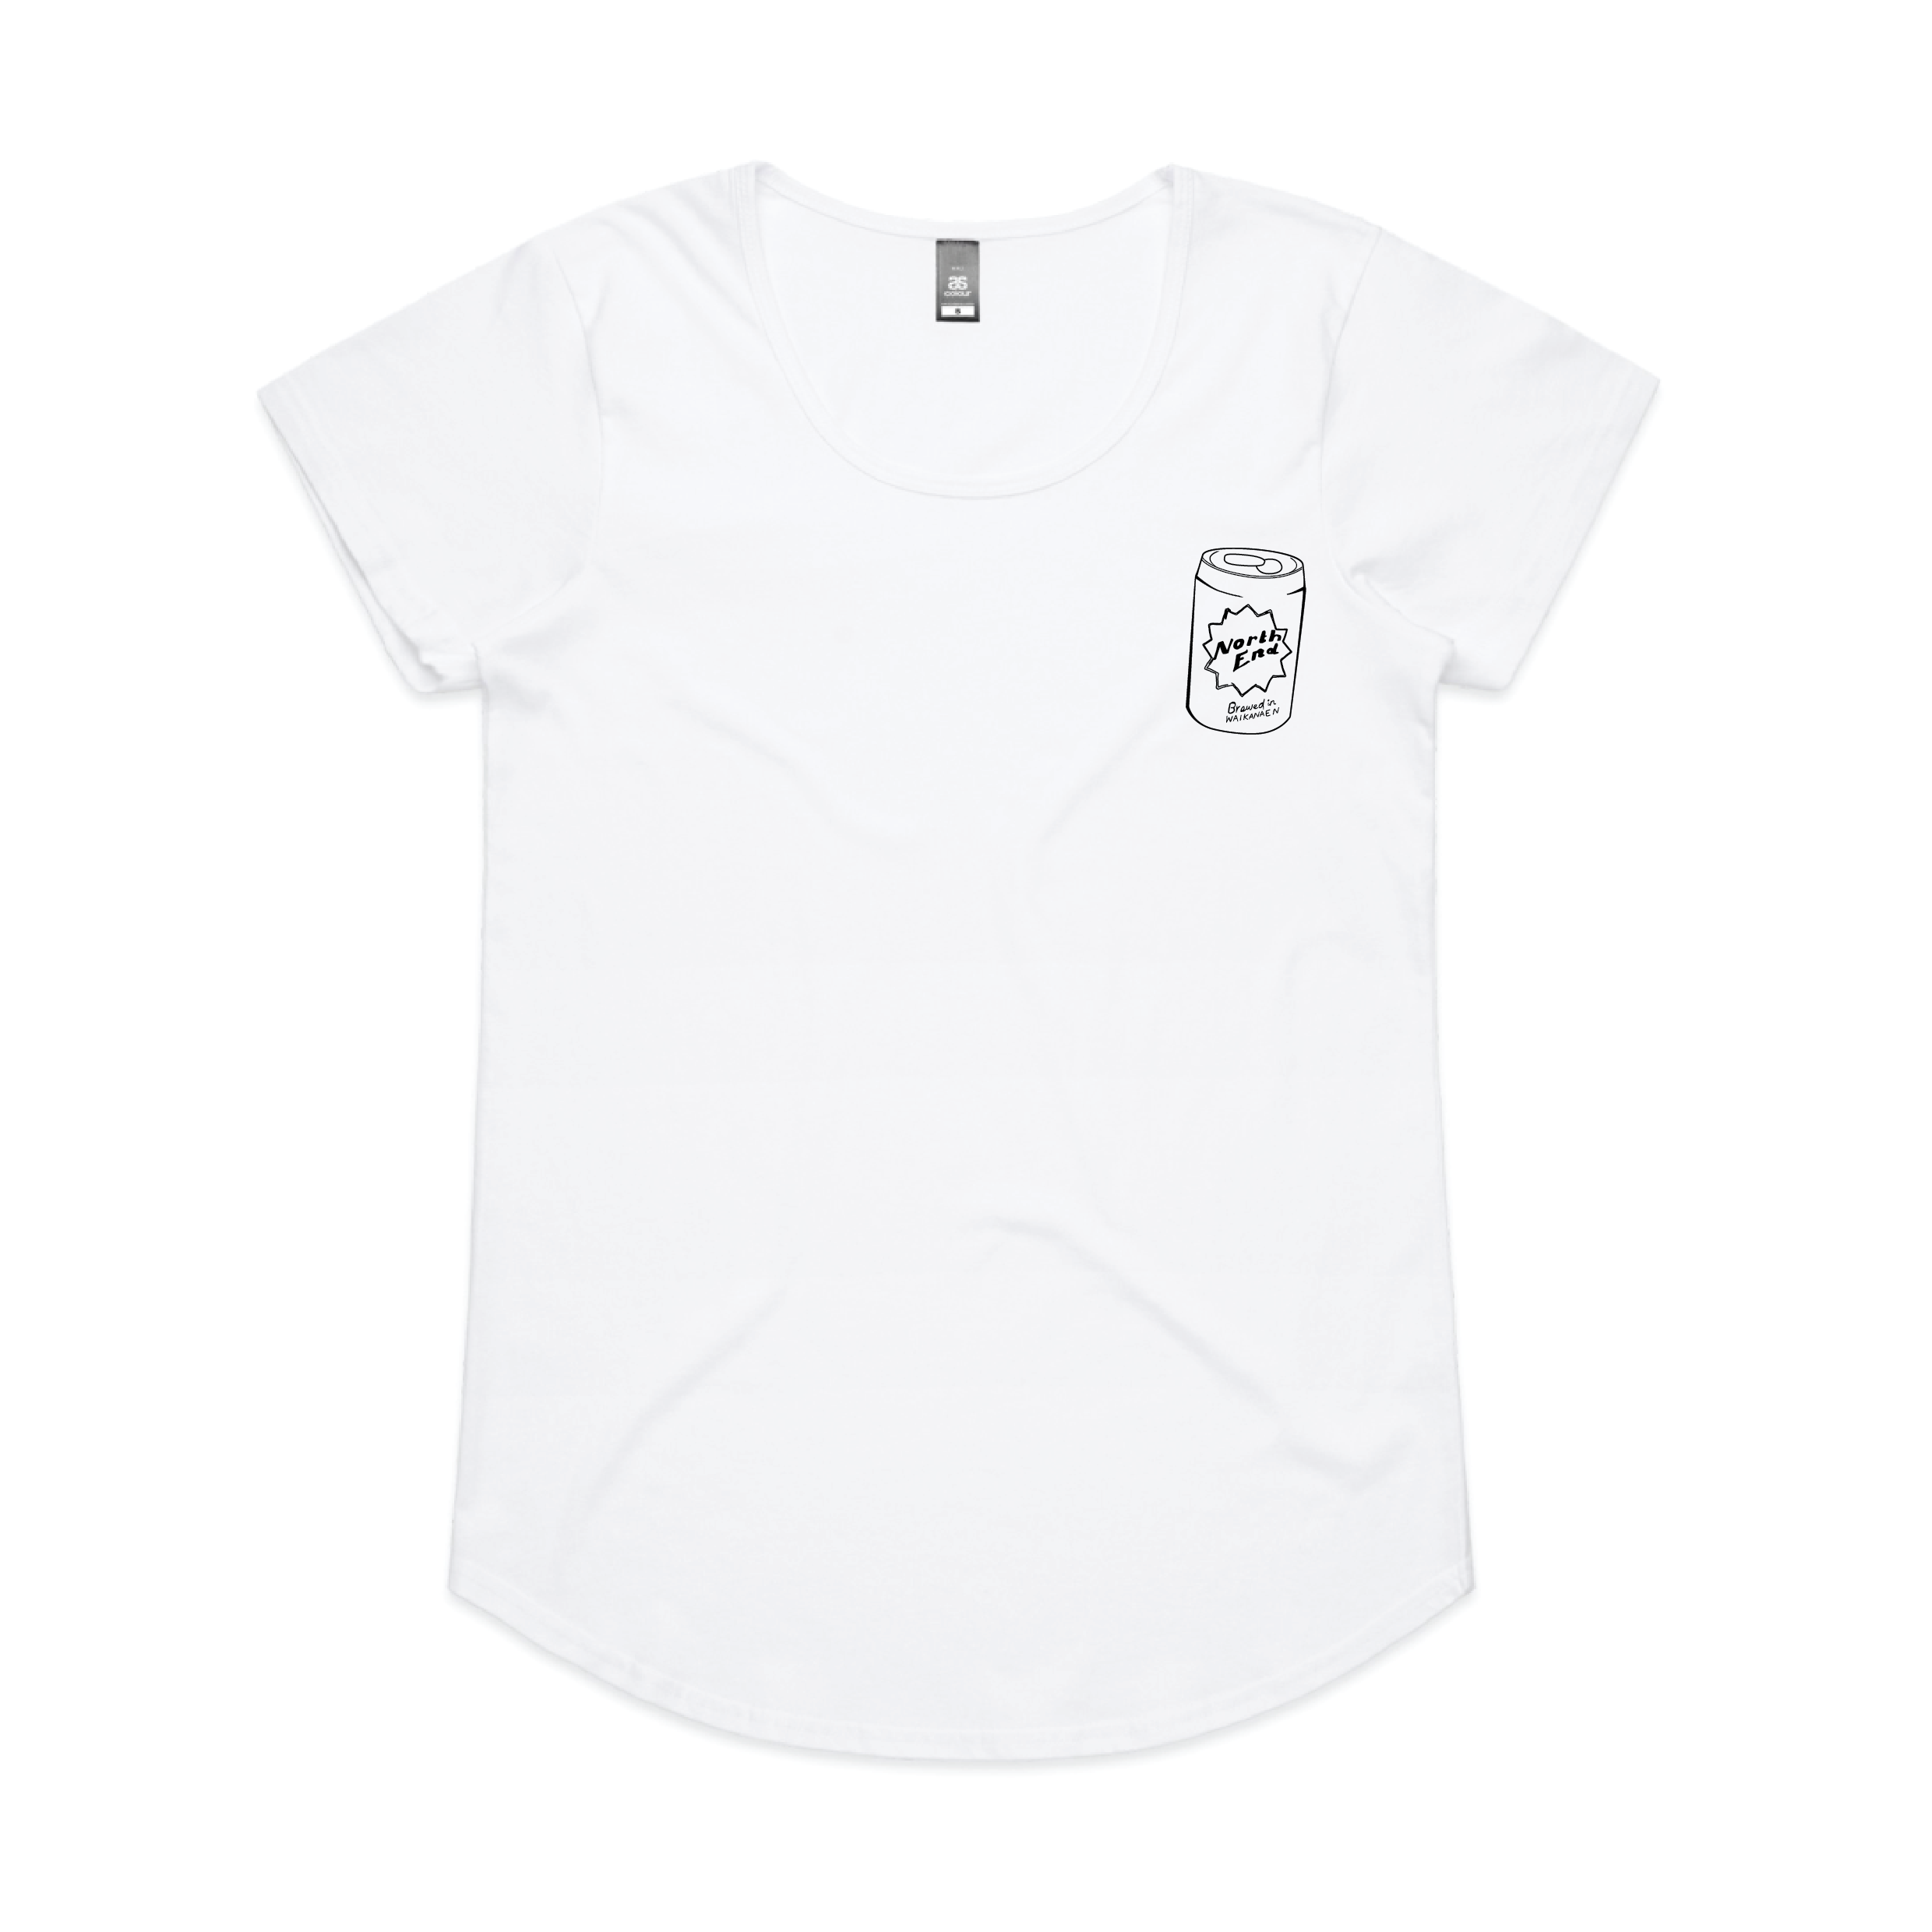 Can Badge' Printed Tee - White - North End Brewery Co.